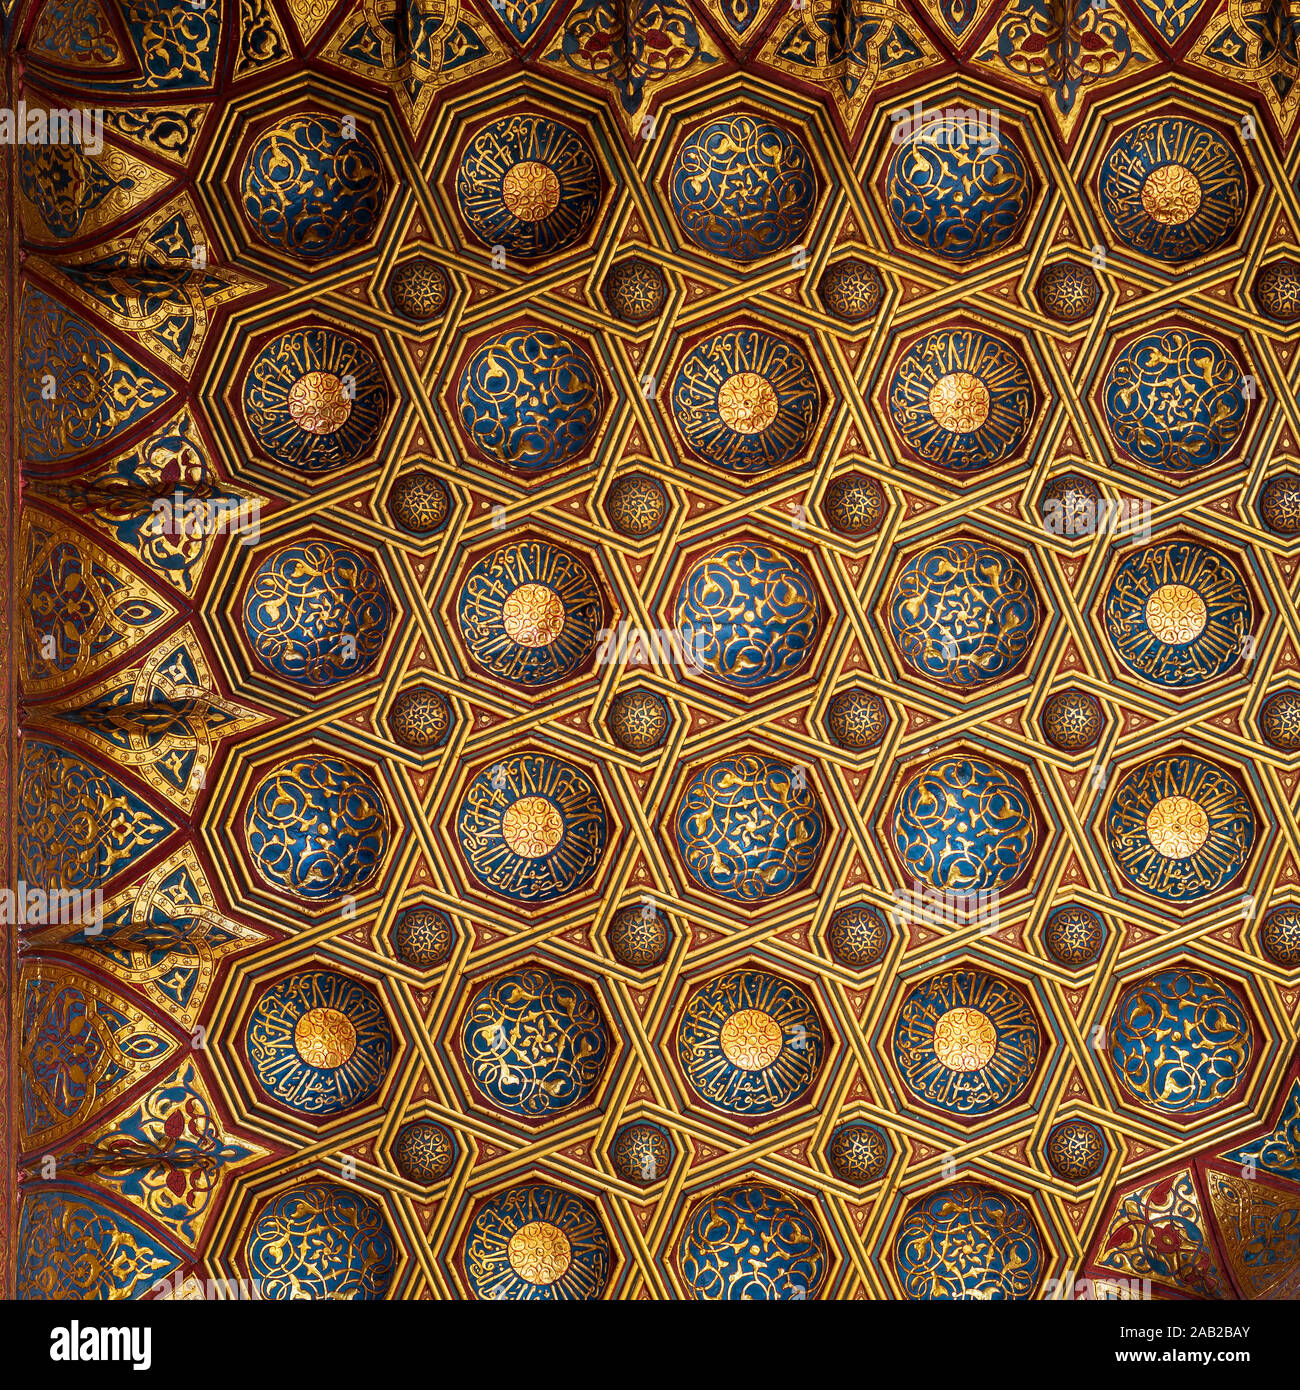 Golden floral pattern decorations, part of ceiling of Mausoleum of Sultan Qalawun, Sultan Qalawun Complex, located in Muizz Street, Gamalia district, Cairo, Egypt Stock Photo